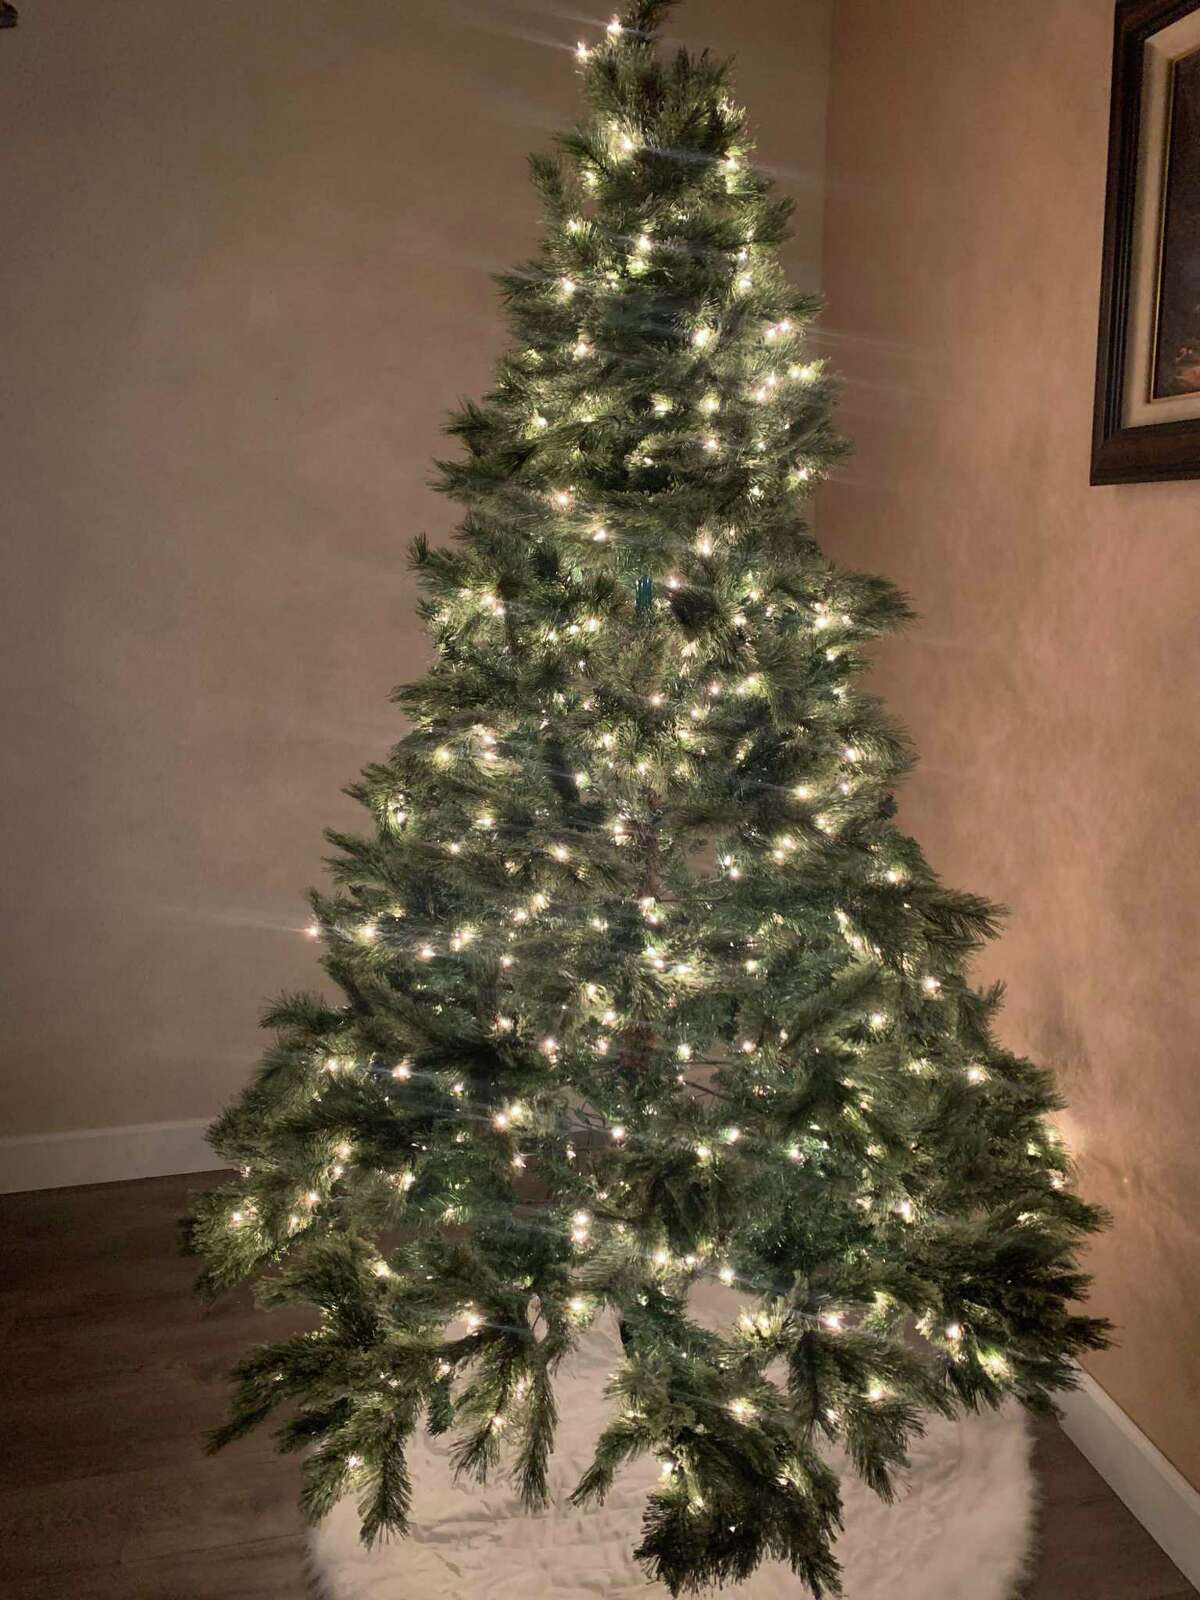 Our Christmas tree in 2019 — before decorations, the COVID-19 pandemic and deaths of my aunt and cousin. This year, we will trim this tree and seek light and joy and peace, despite the darkness. My hope is that you will, too.